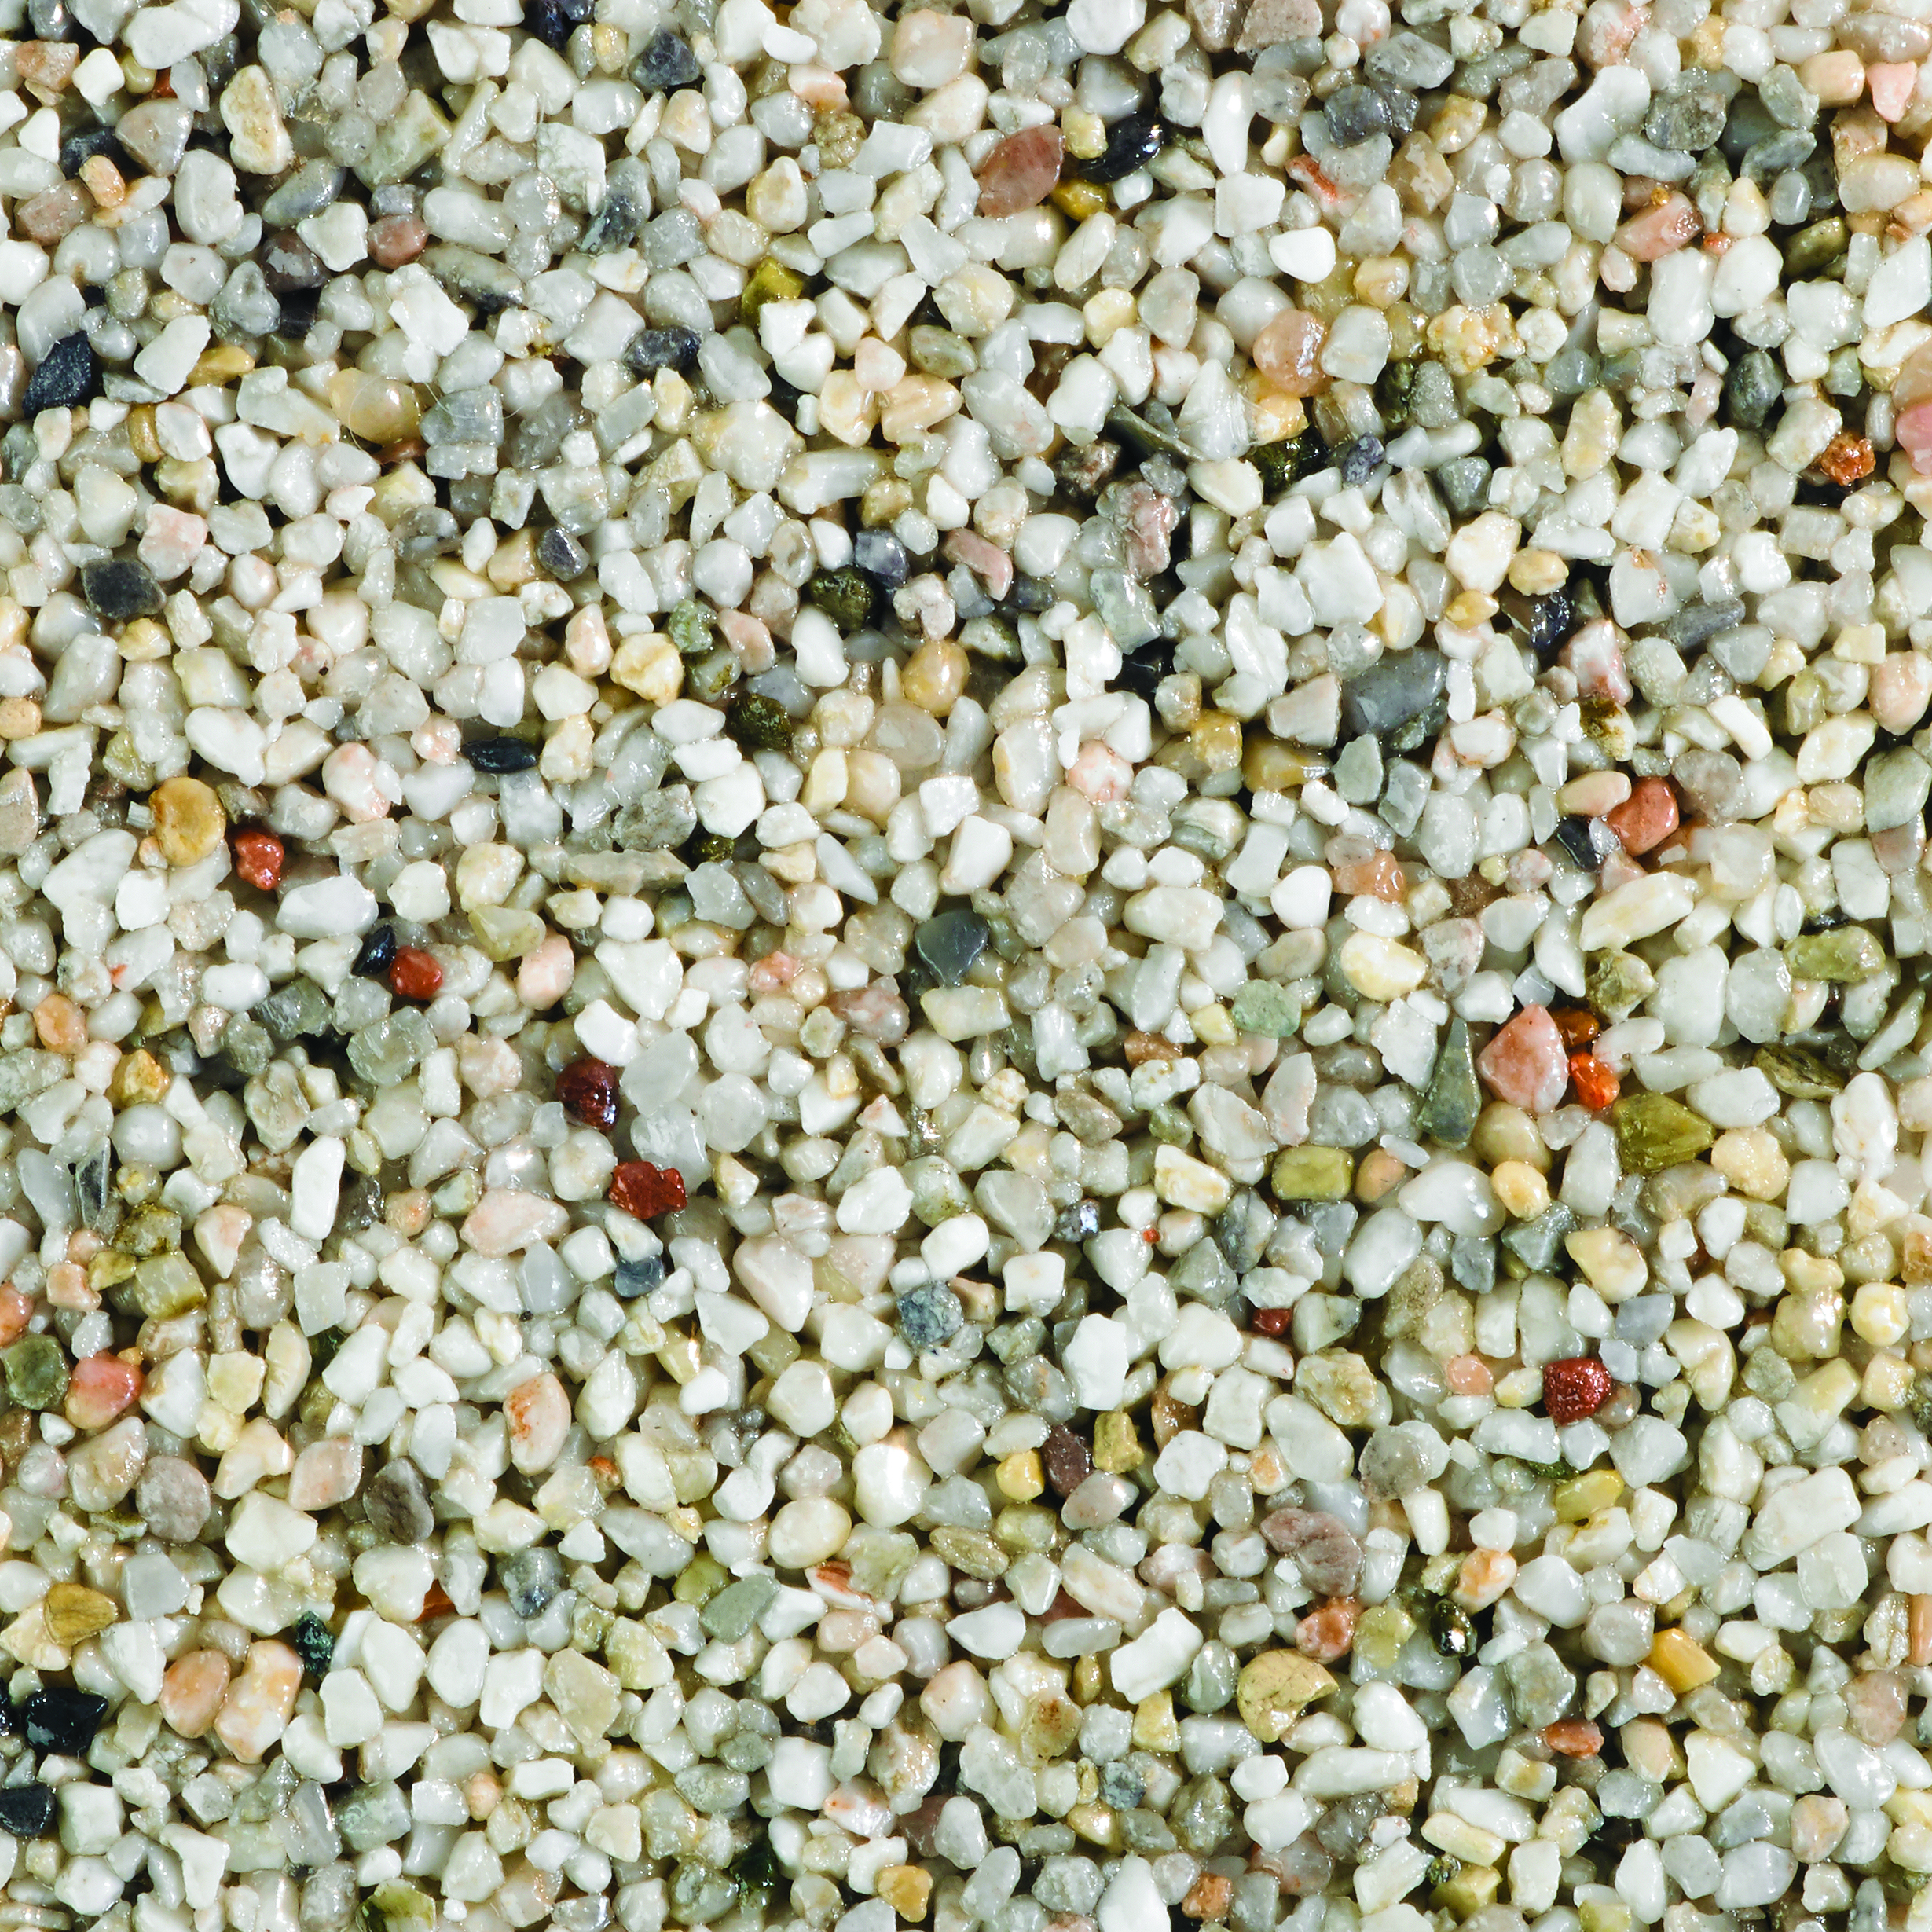 Pearl Quartz gravel that can be used in various applications from Resin Bound Surfacing to Filtration of water